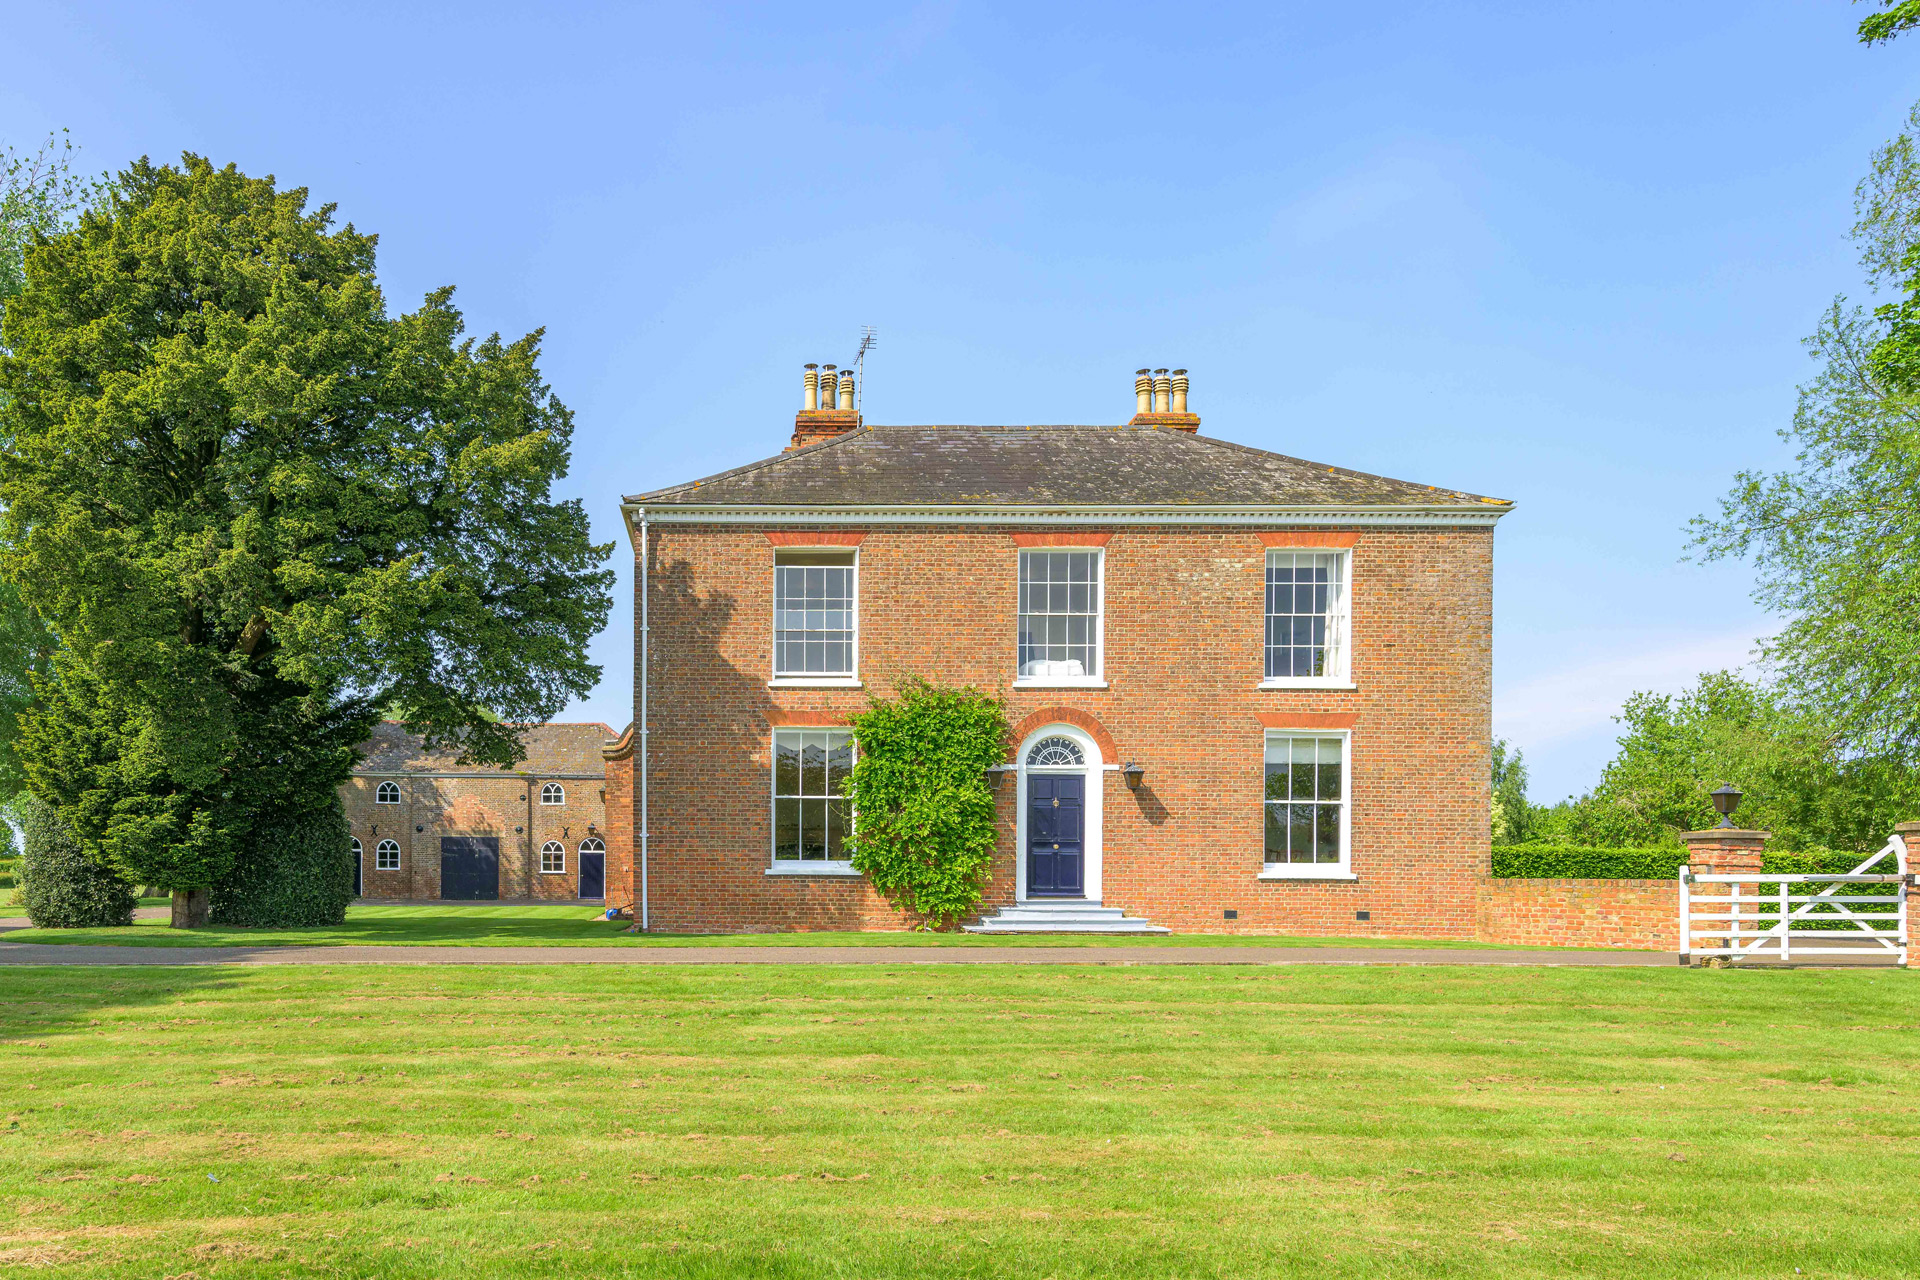 Large red brick country house with arched doorway and a lawn in front.